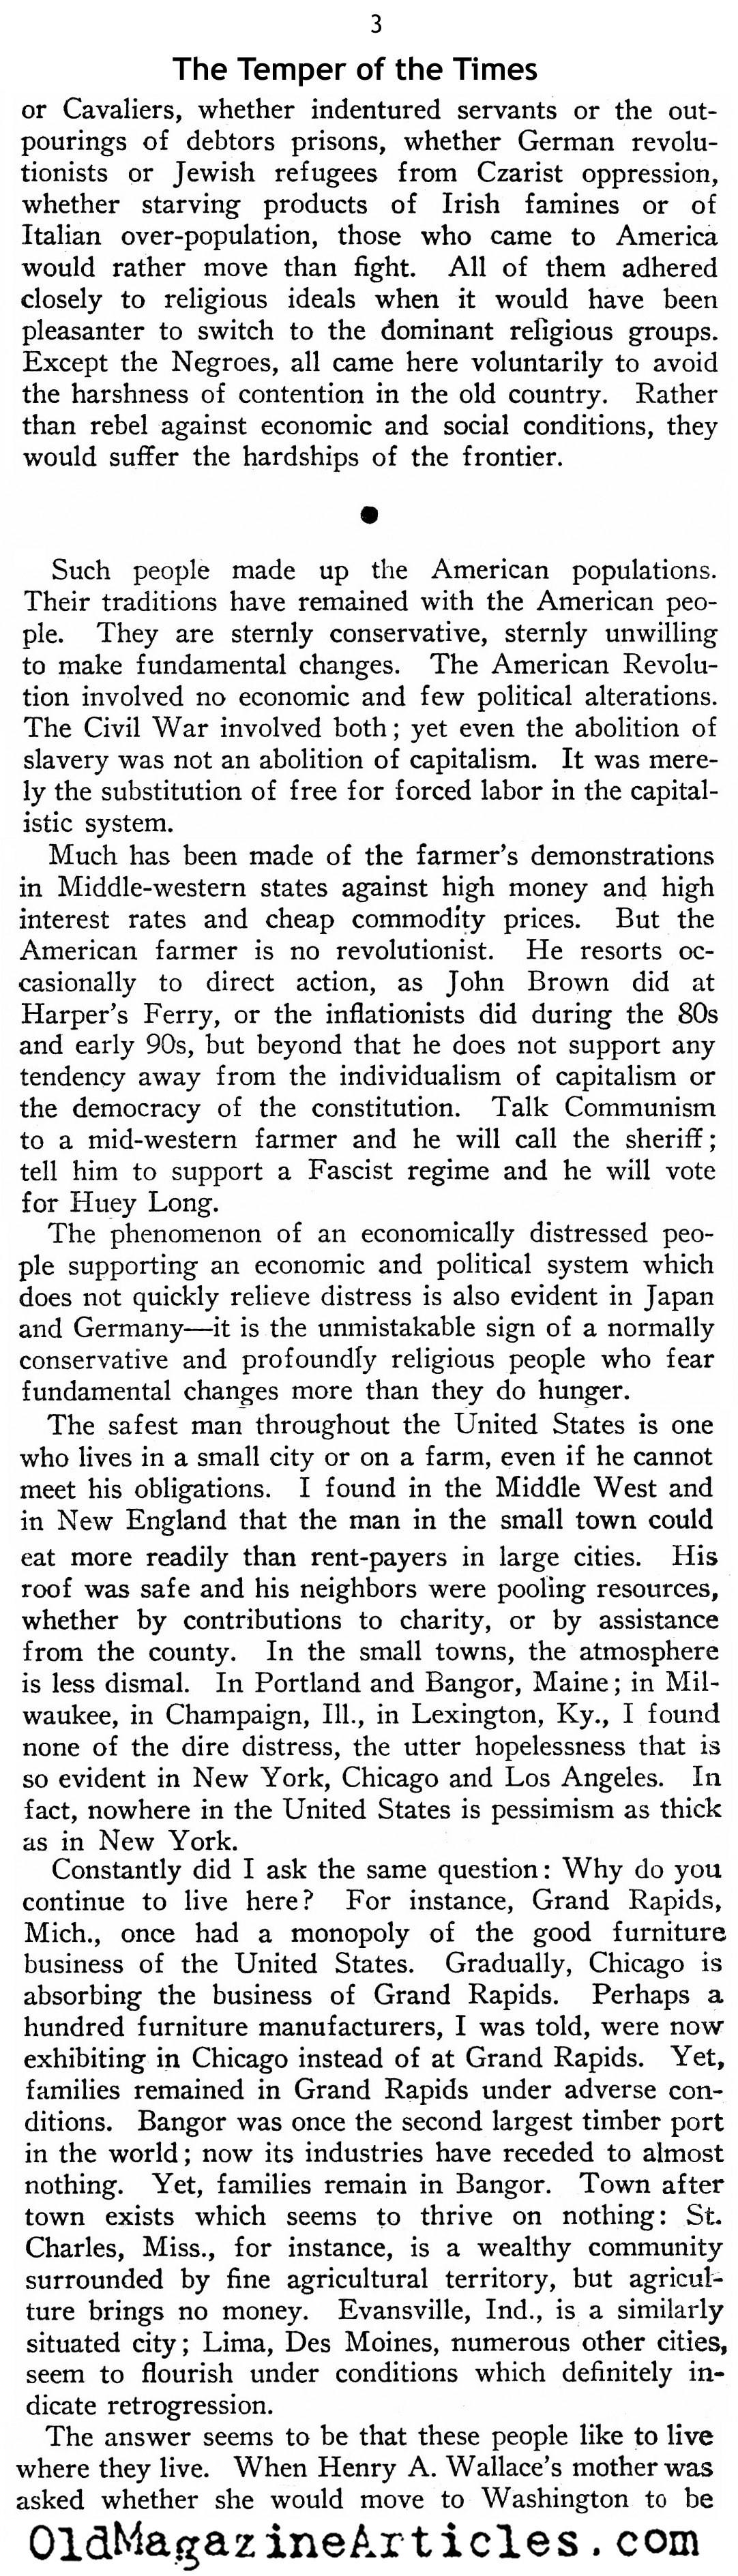 The Temper of the Times (New Outlook Magazine, 1933)